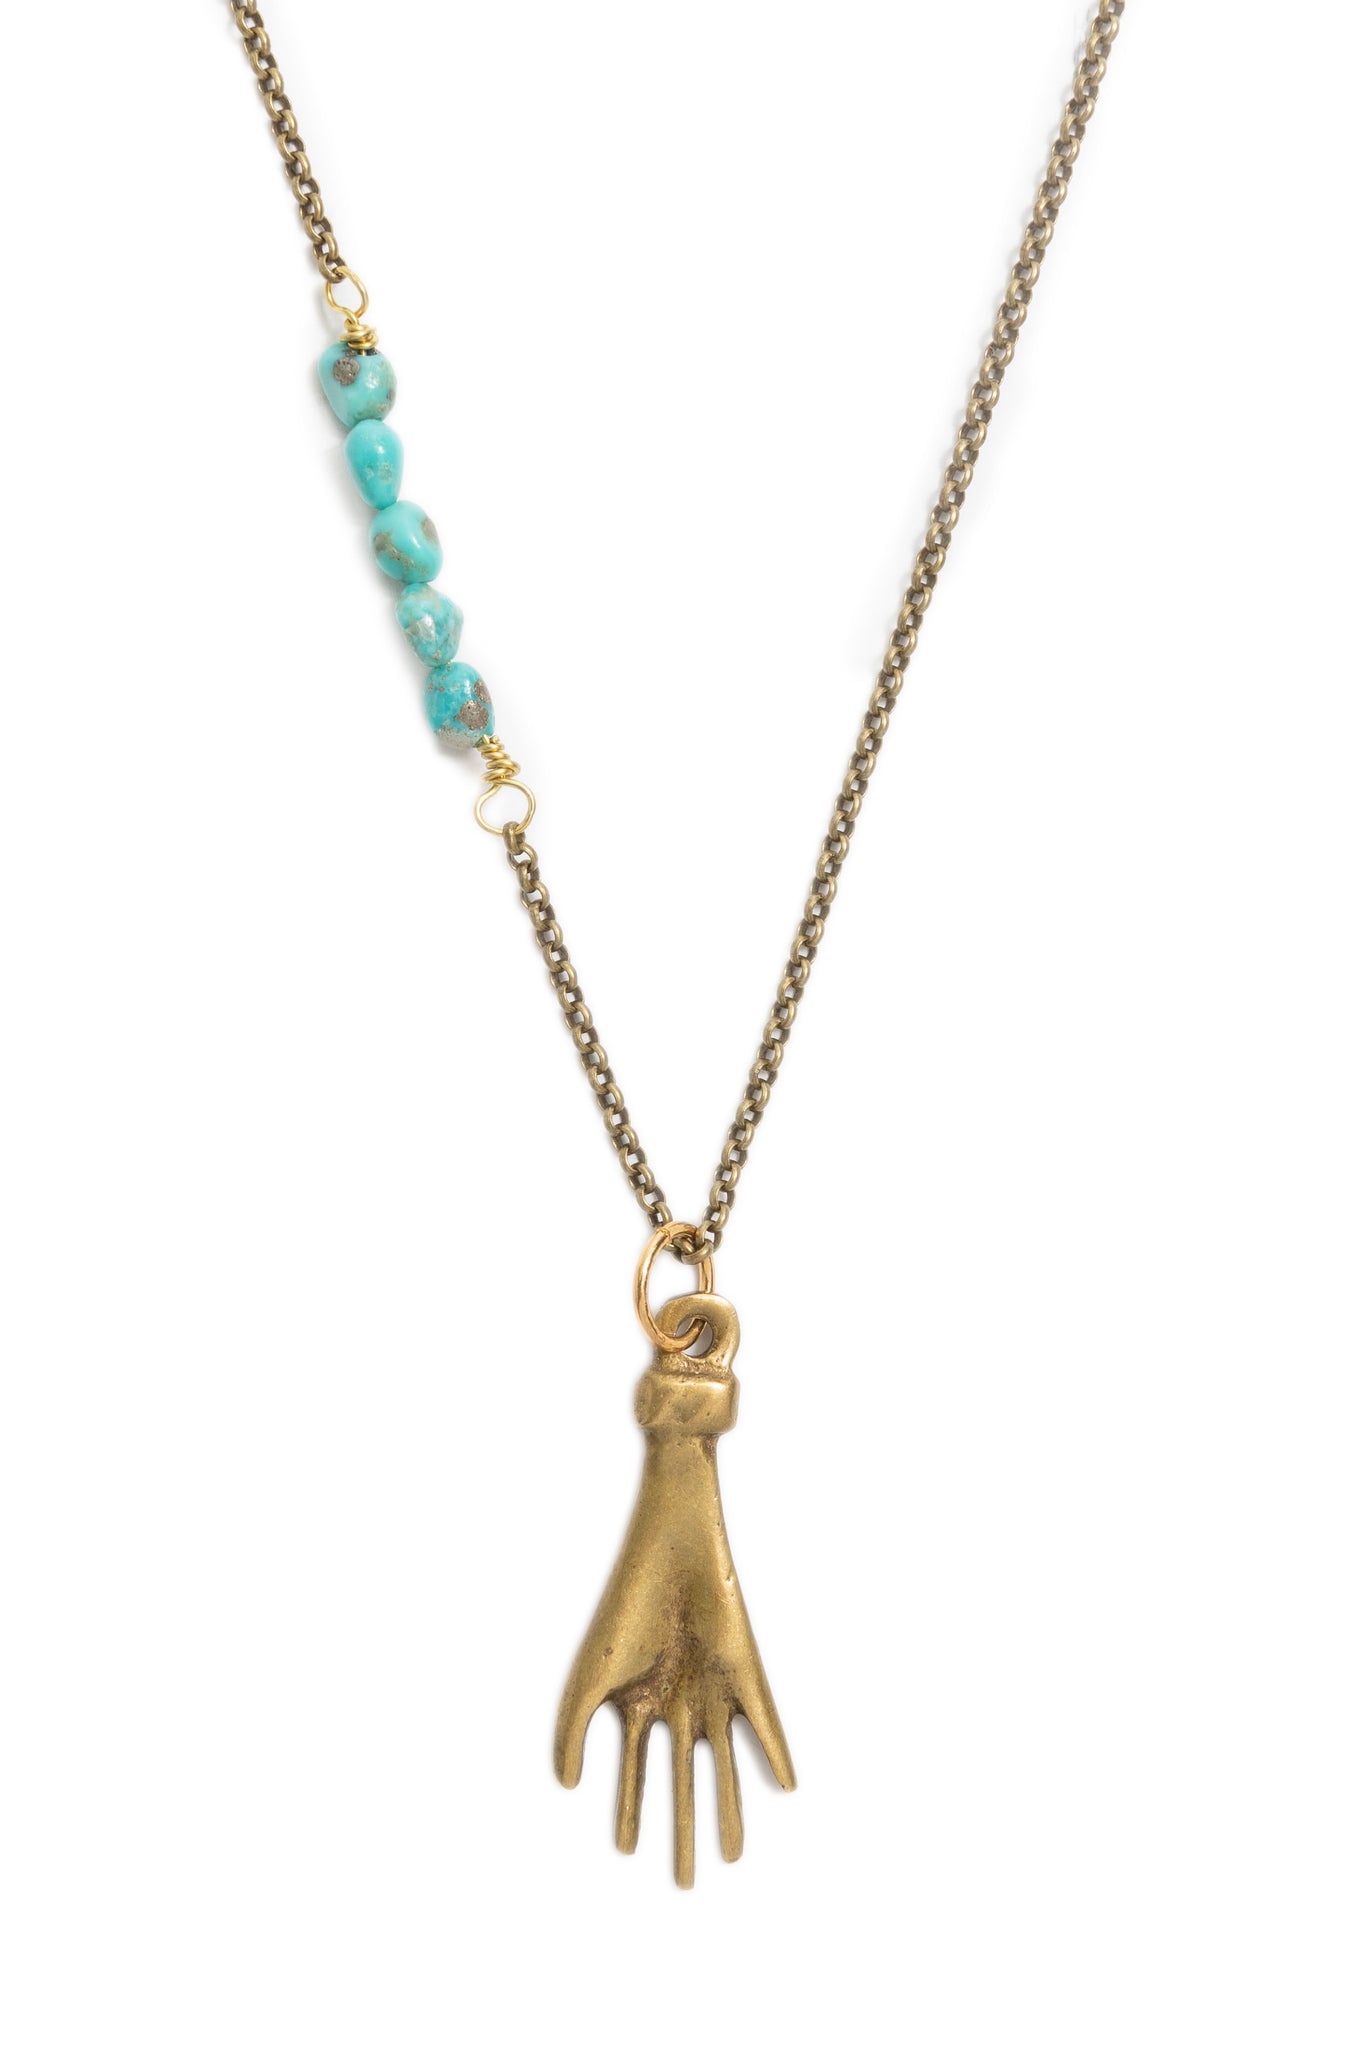 Brass Hand + Turquoise Necklace